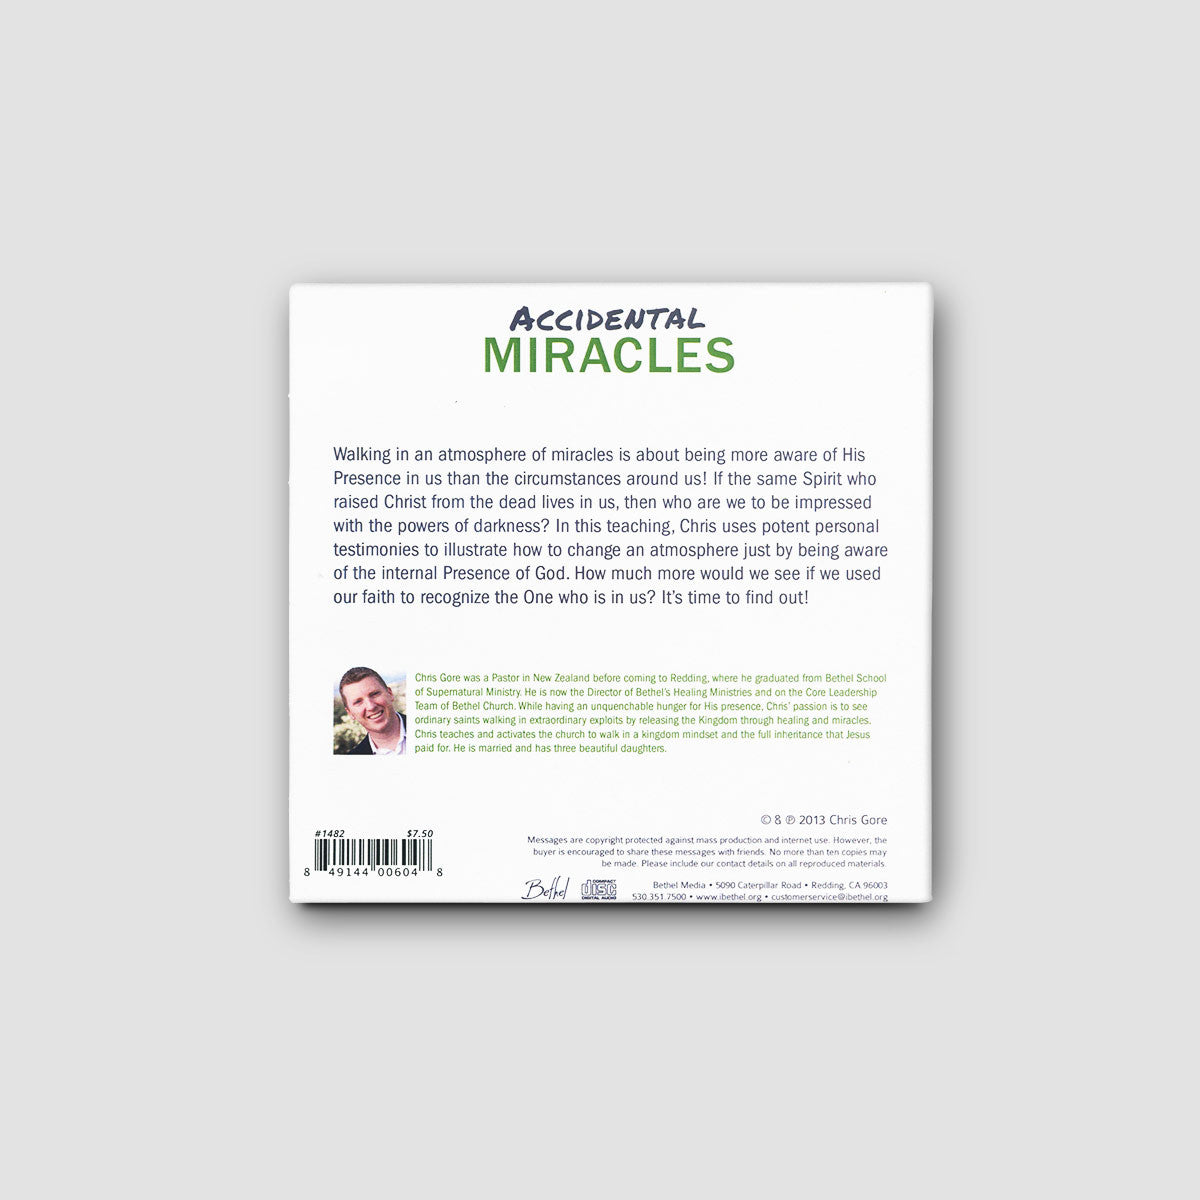 Accidental Miracles